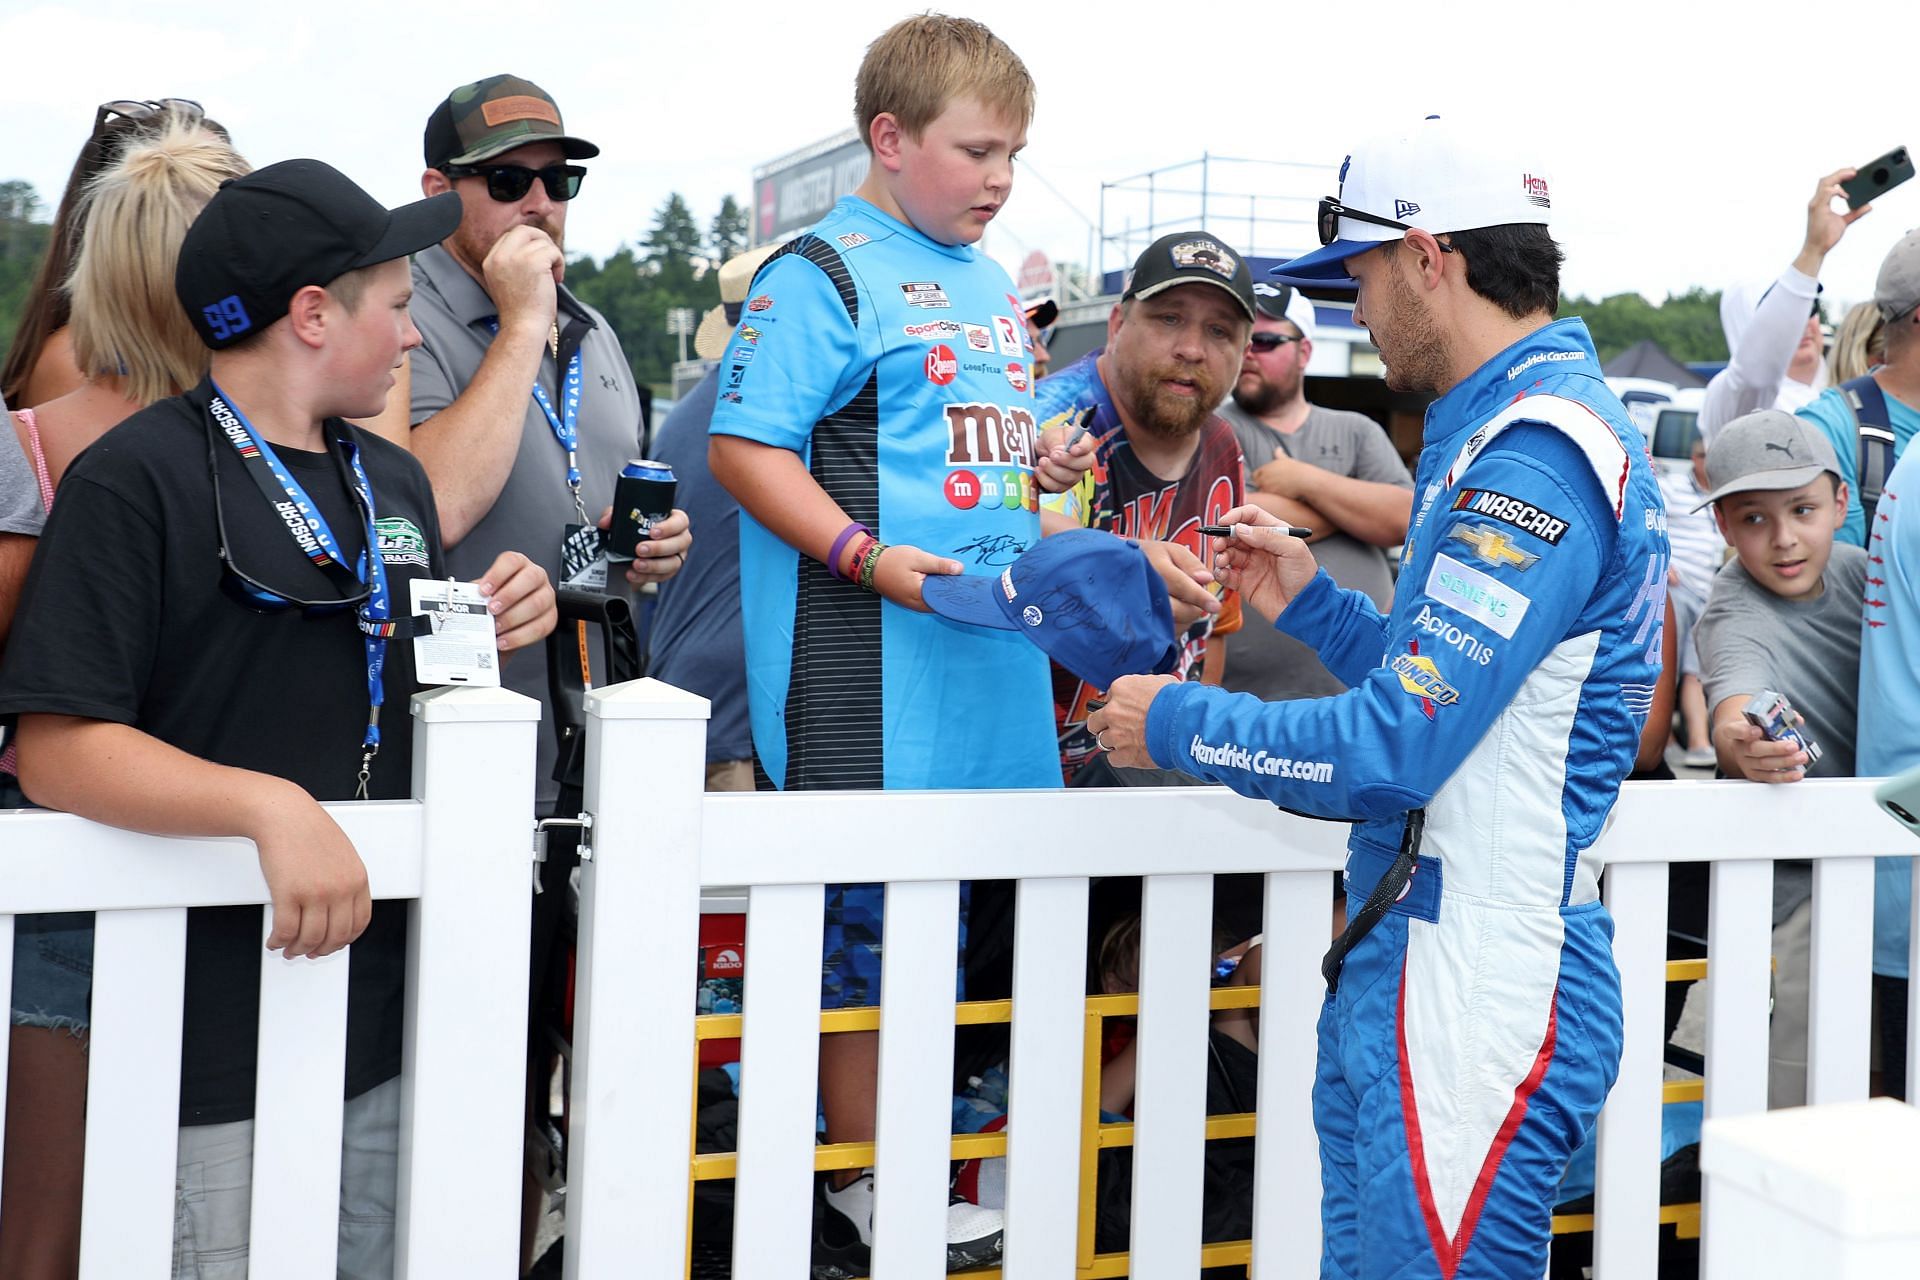 Kyle Larson signs an autograph for a young NASCAR fan on the red carpet before the NASCAR Cup Series Ambetter 301 at New Hampshire Motor Speedway on July 17, 2022, in Loudon, New Hampshire (Photo by James Gilbert/Getty Images)